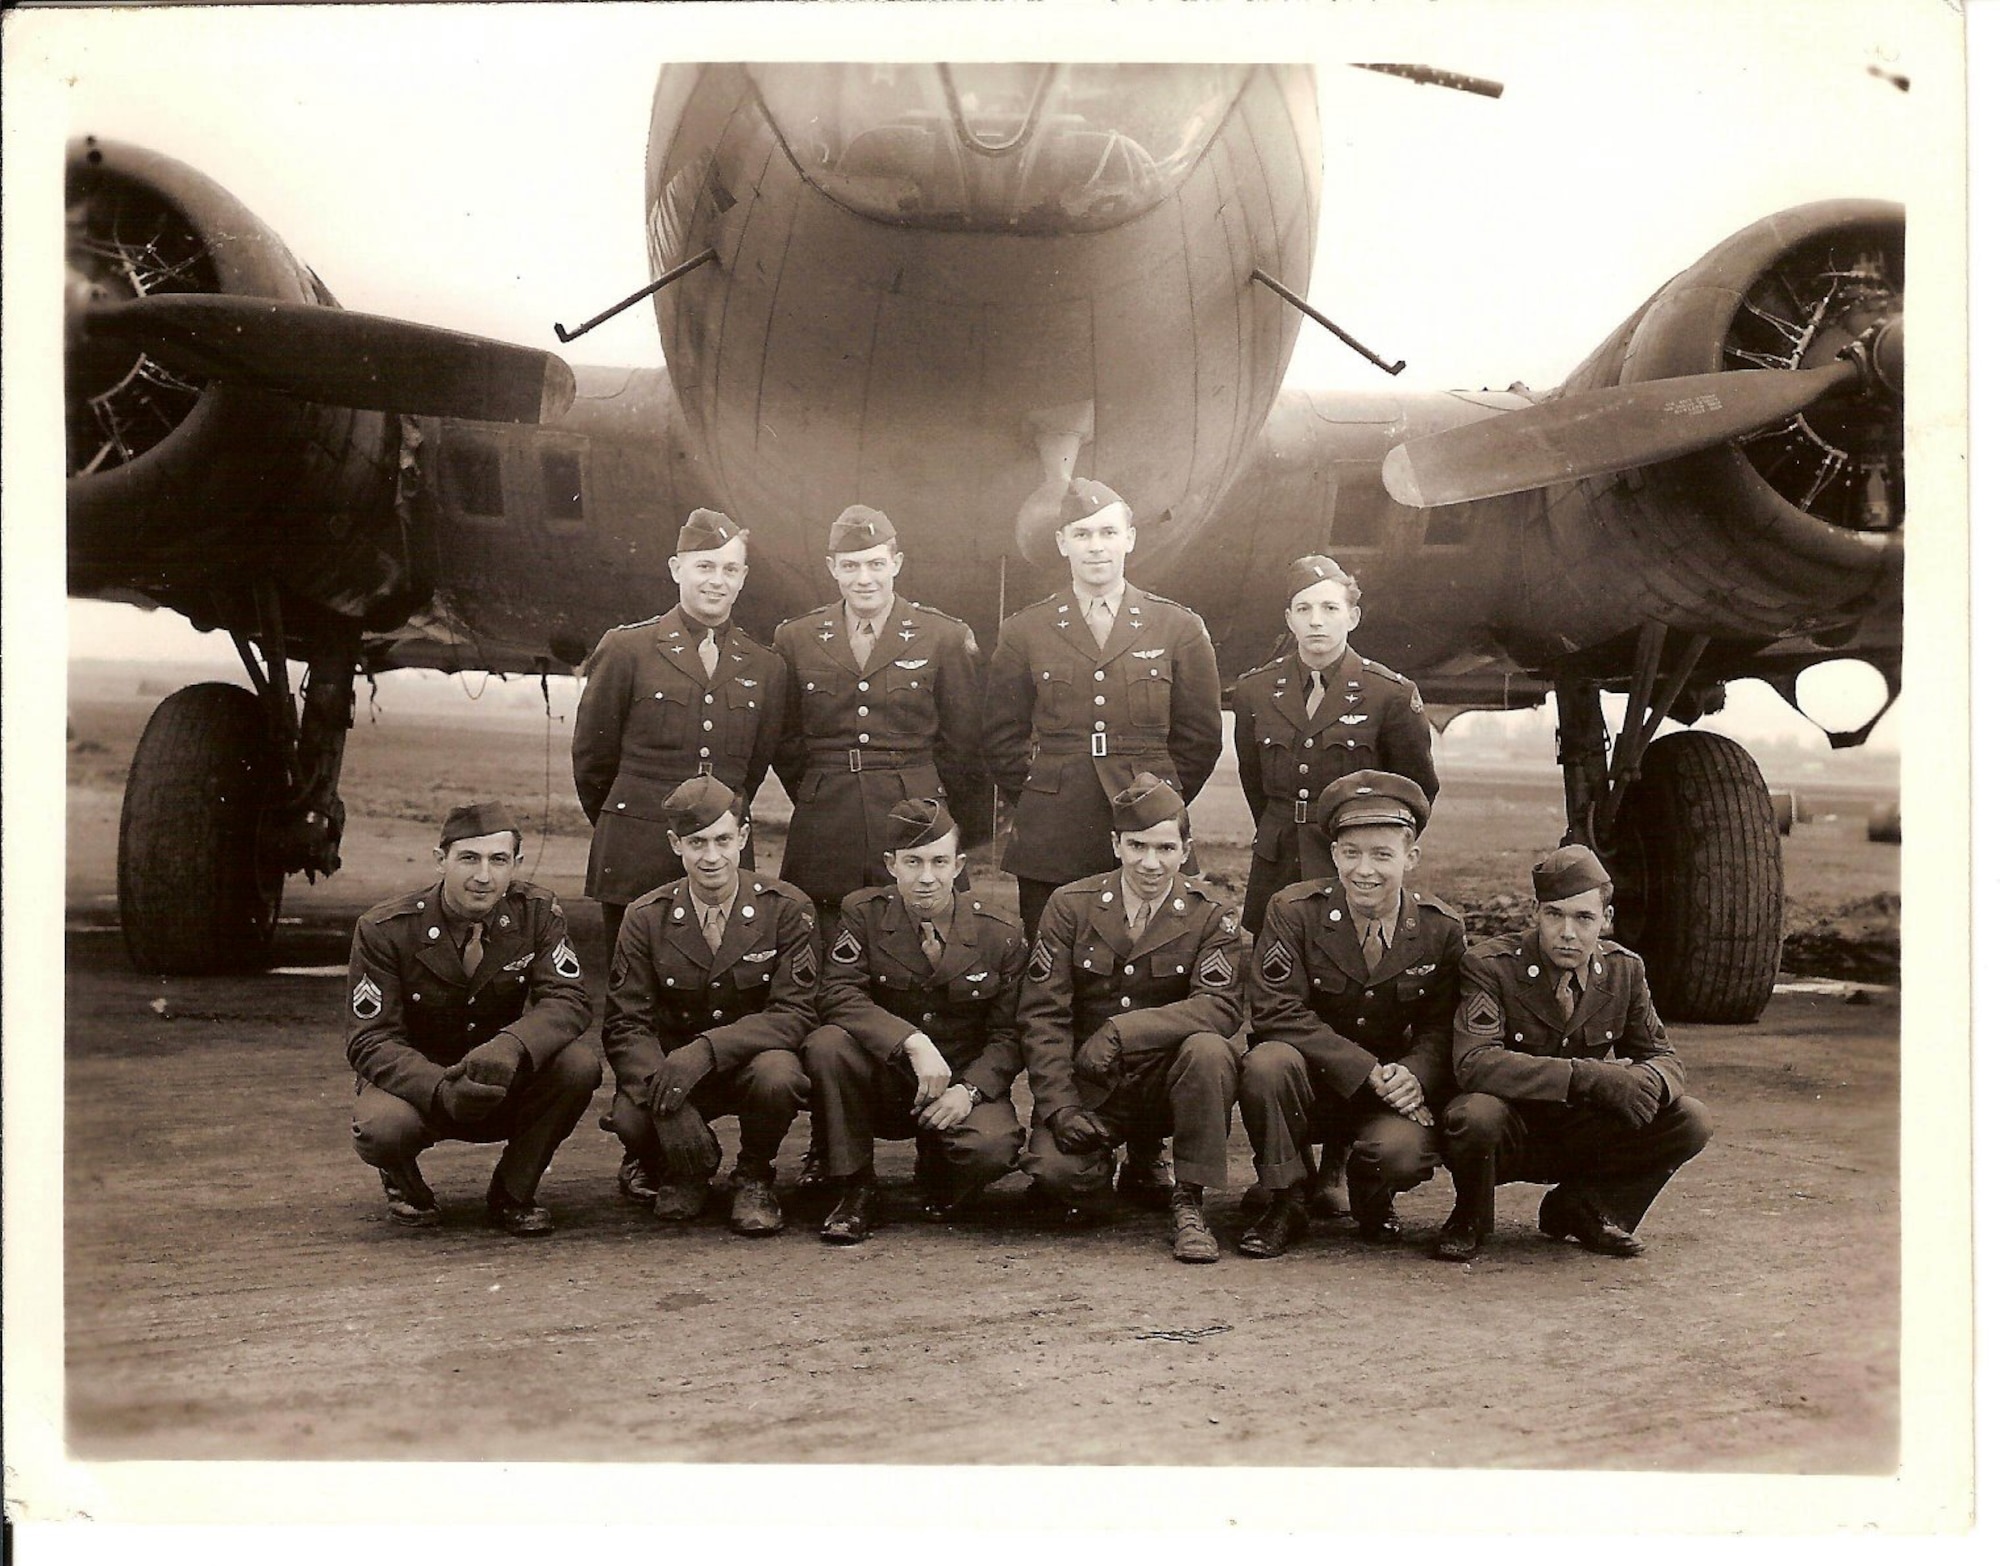 Veterans of The Mighty Eighth: The Oregon Air National Guard’s connections to the Eighth Air Force of World War II